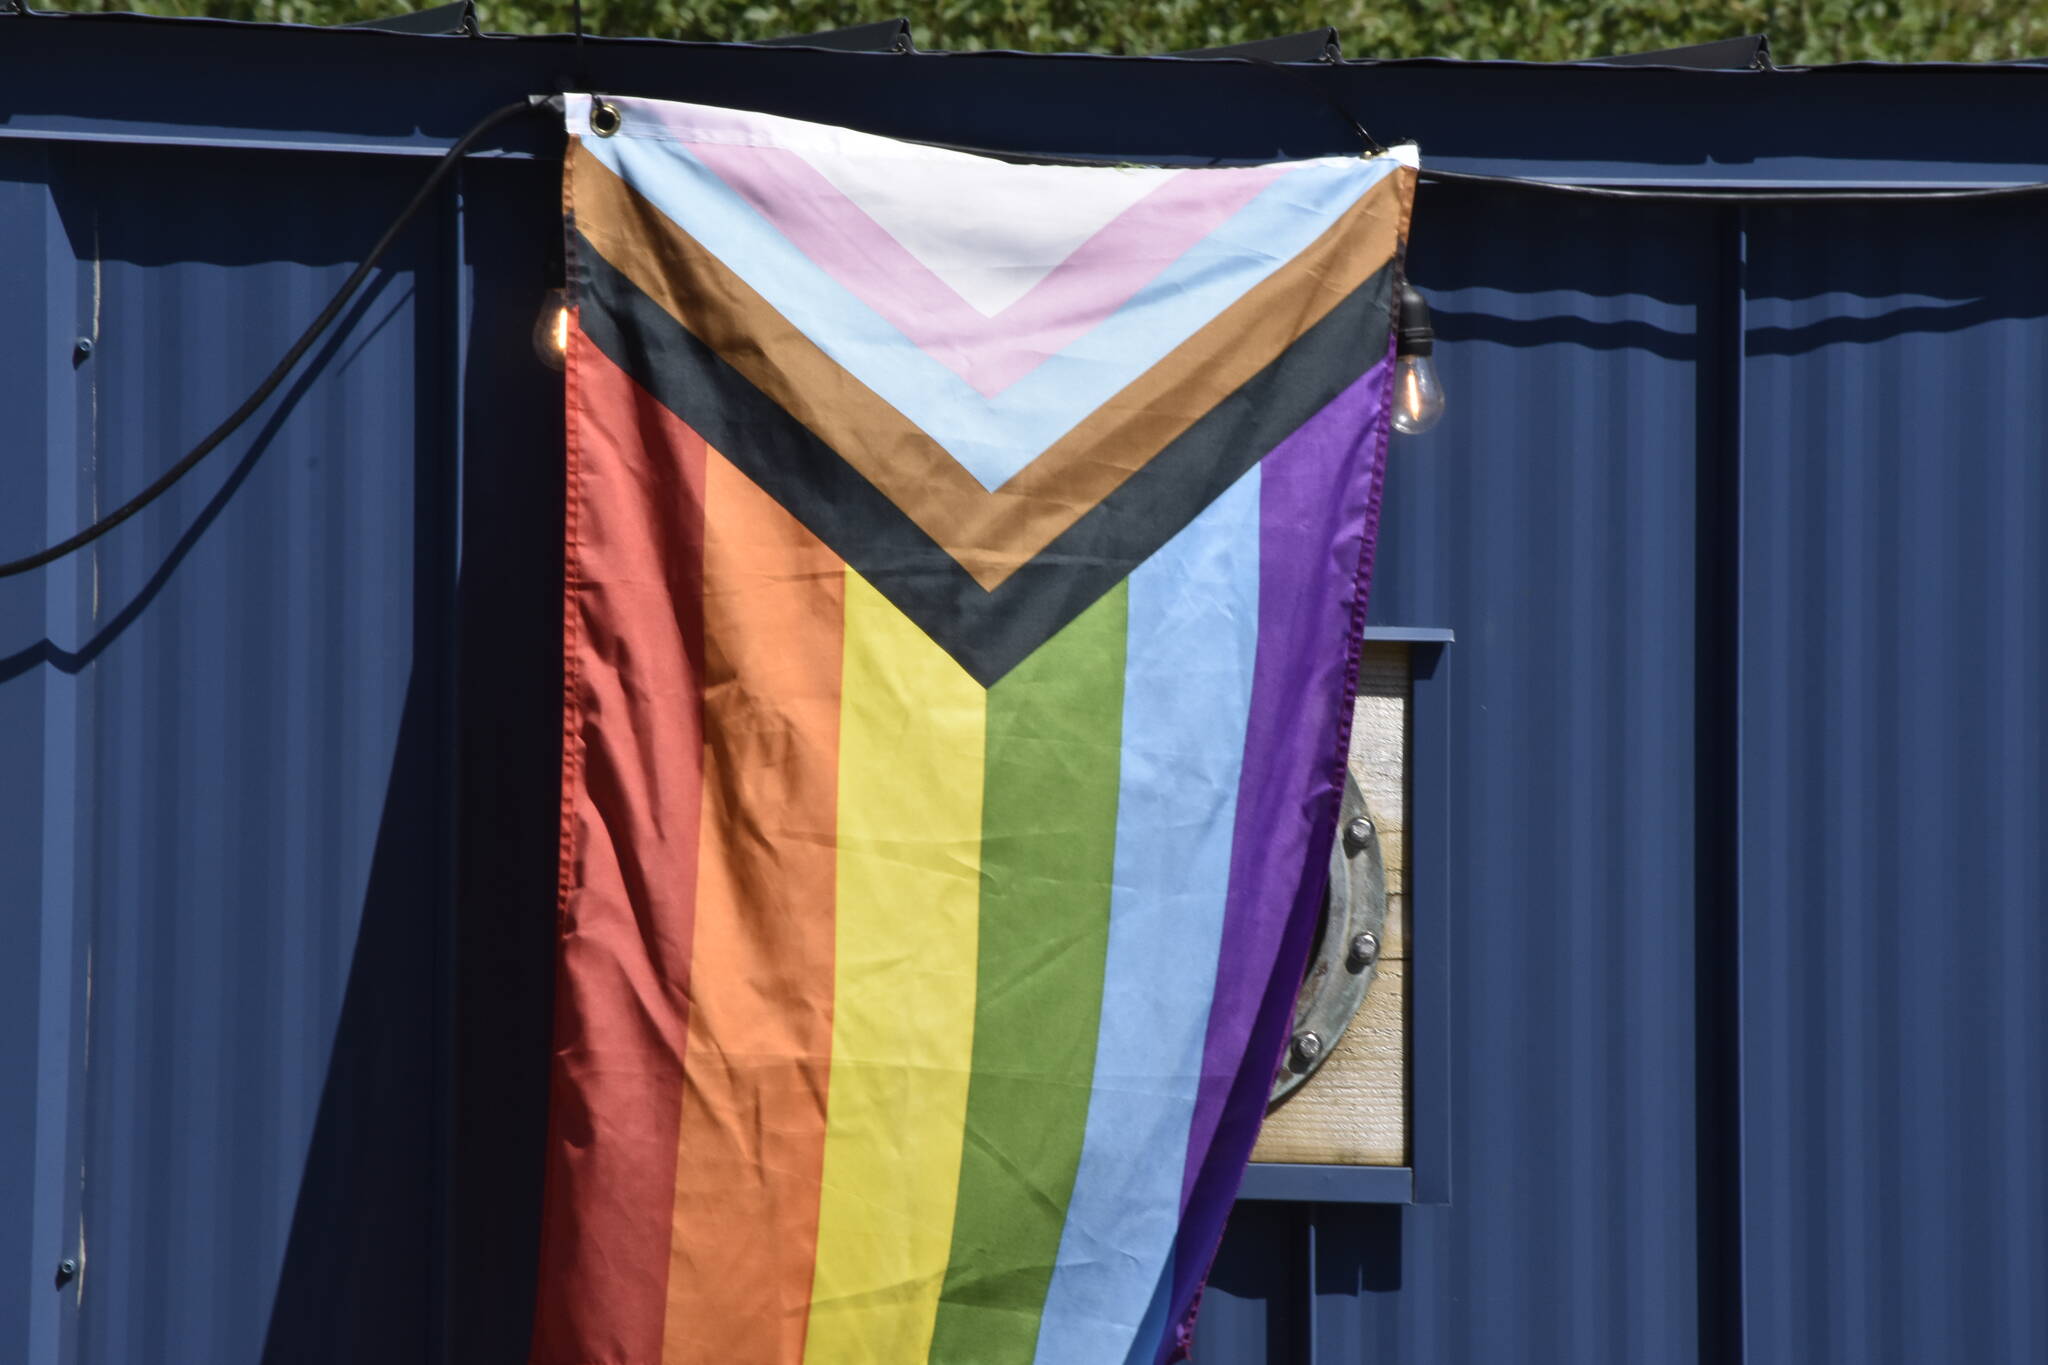 A Pride flag hangs in downtown Juneau on Thursday, June 2, 2022, in honor of June as Pride Month. A number of Juneau’s Pride events are being sponsored by the National Alliance on Mental Illness Juneau, who say LGBTQ youth are at higher risk for depression and suicidal ideation. (Peter Segall / Juneau Empire)